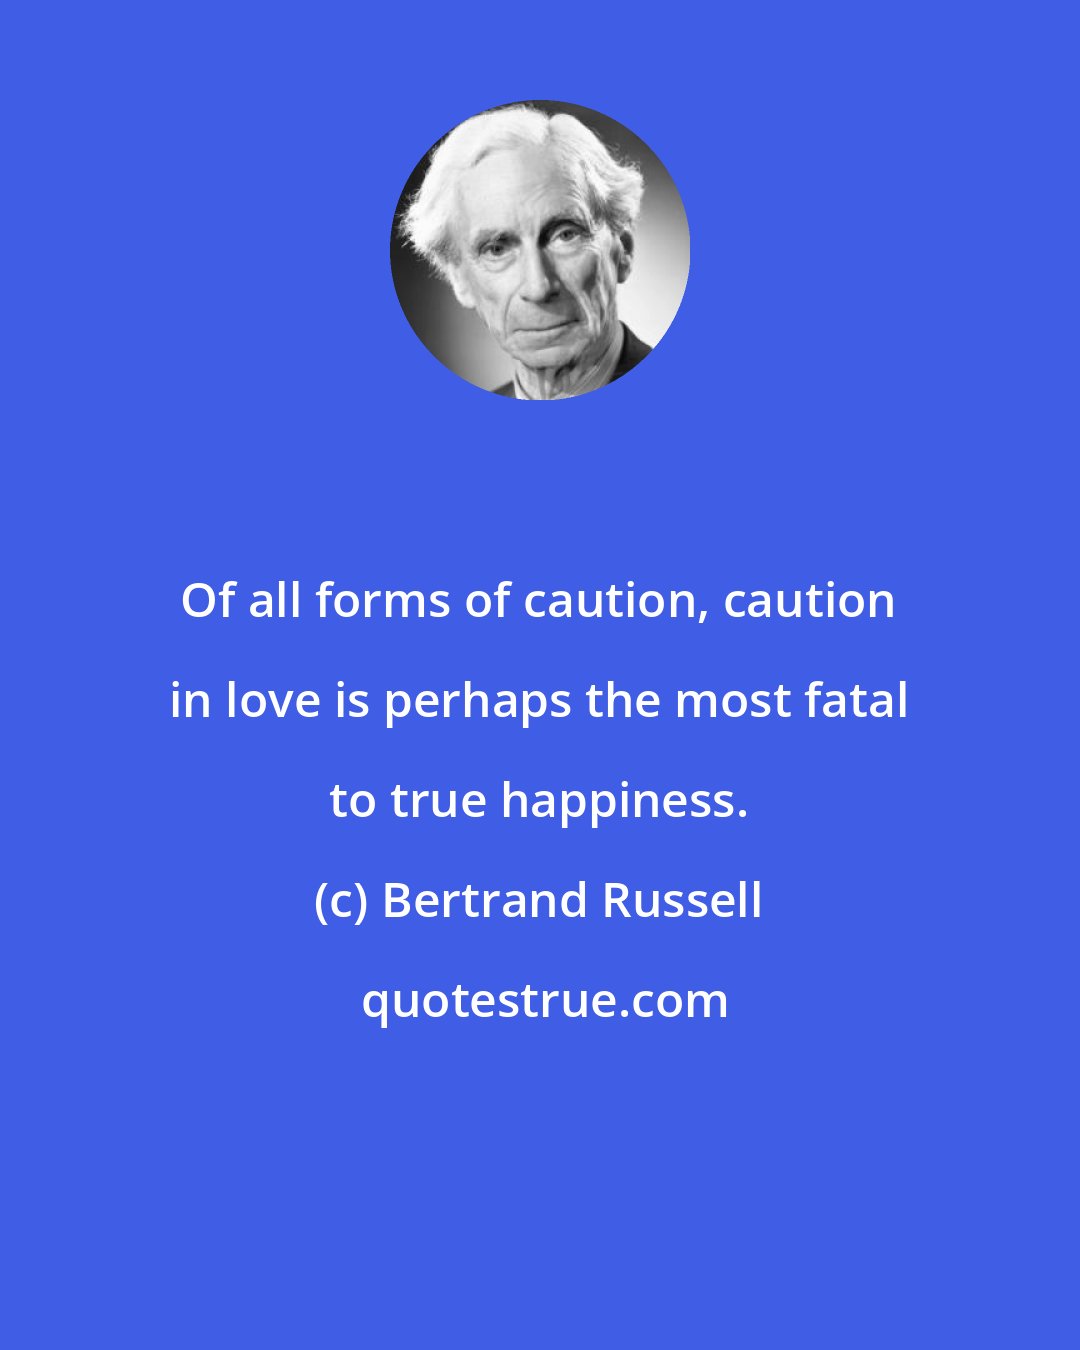 Bertrand Russell: Of all forms of caution, caution in love is perhaps the most fatal to true happiness.